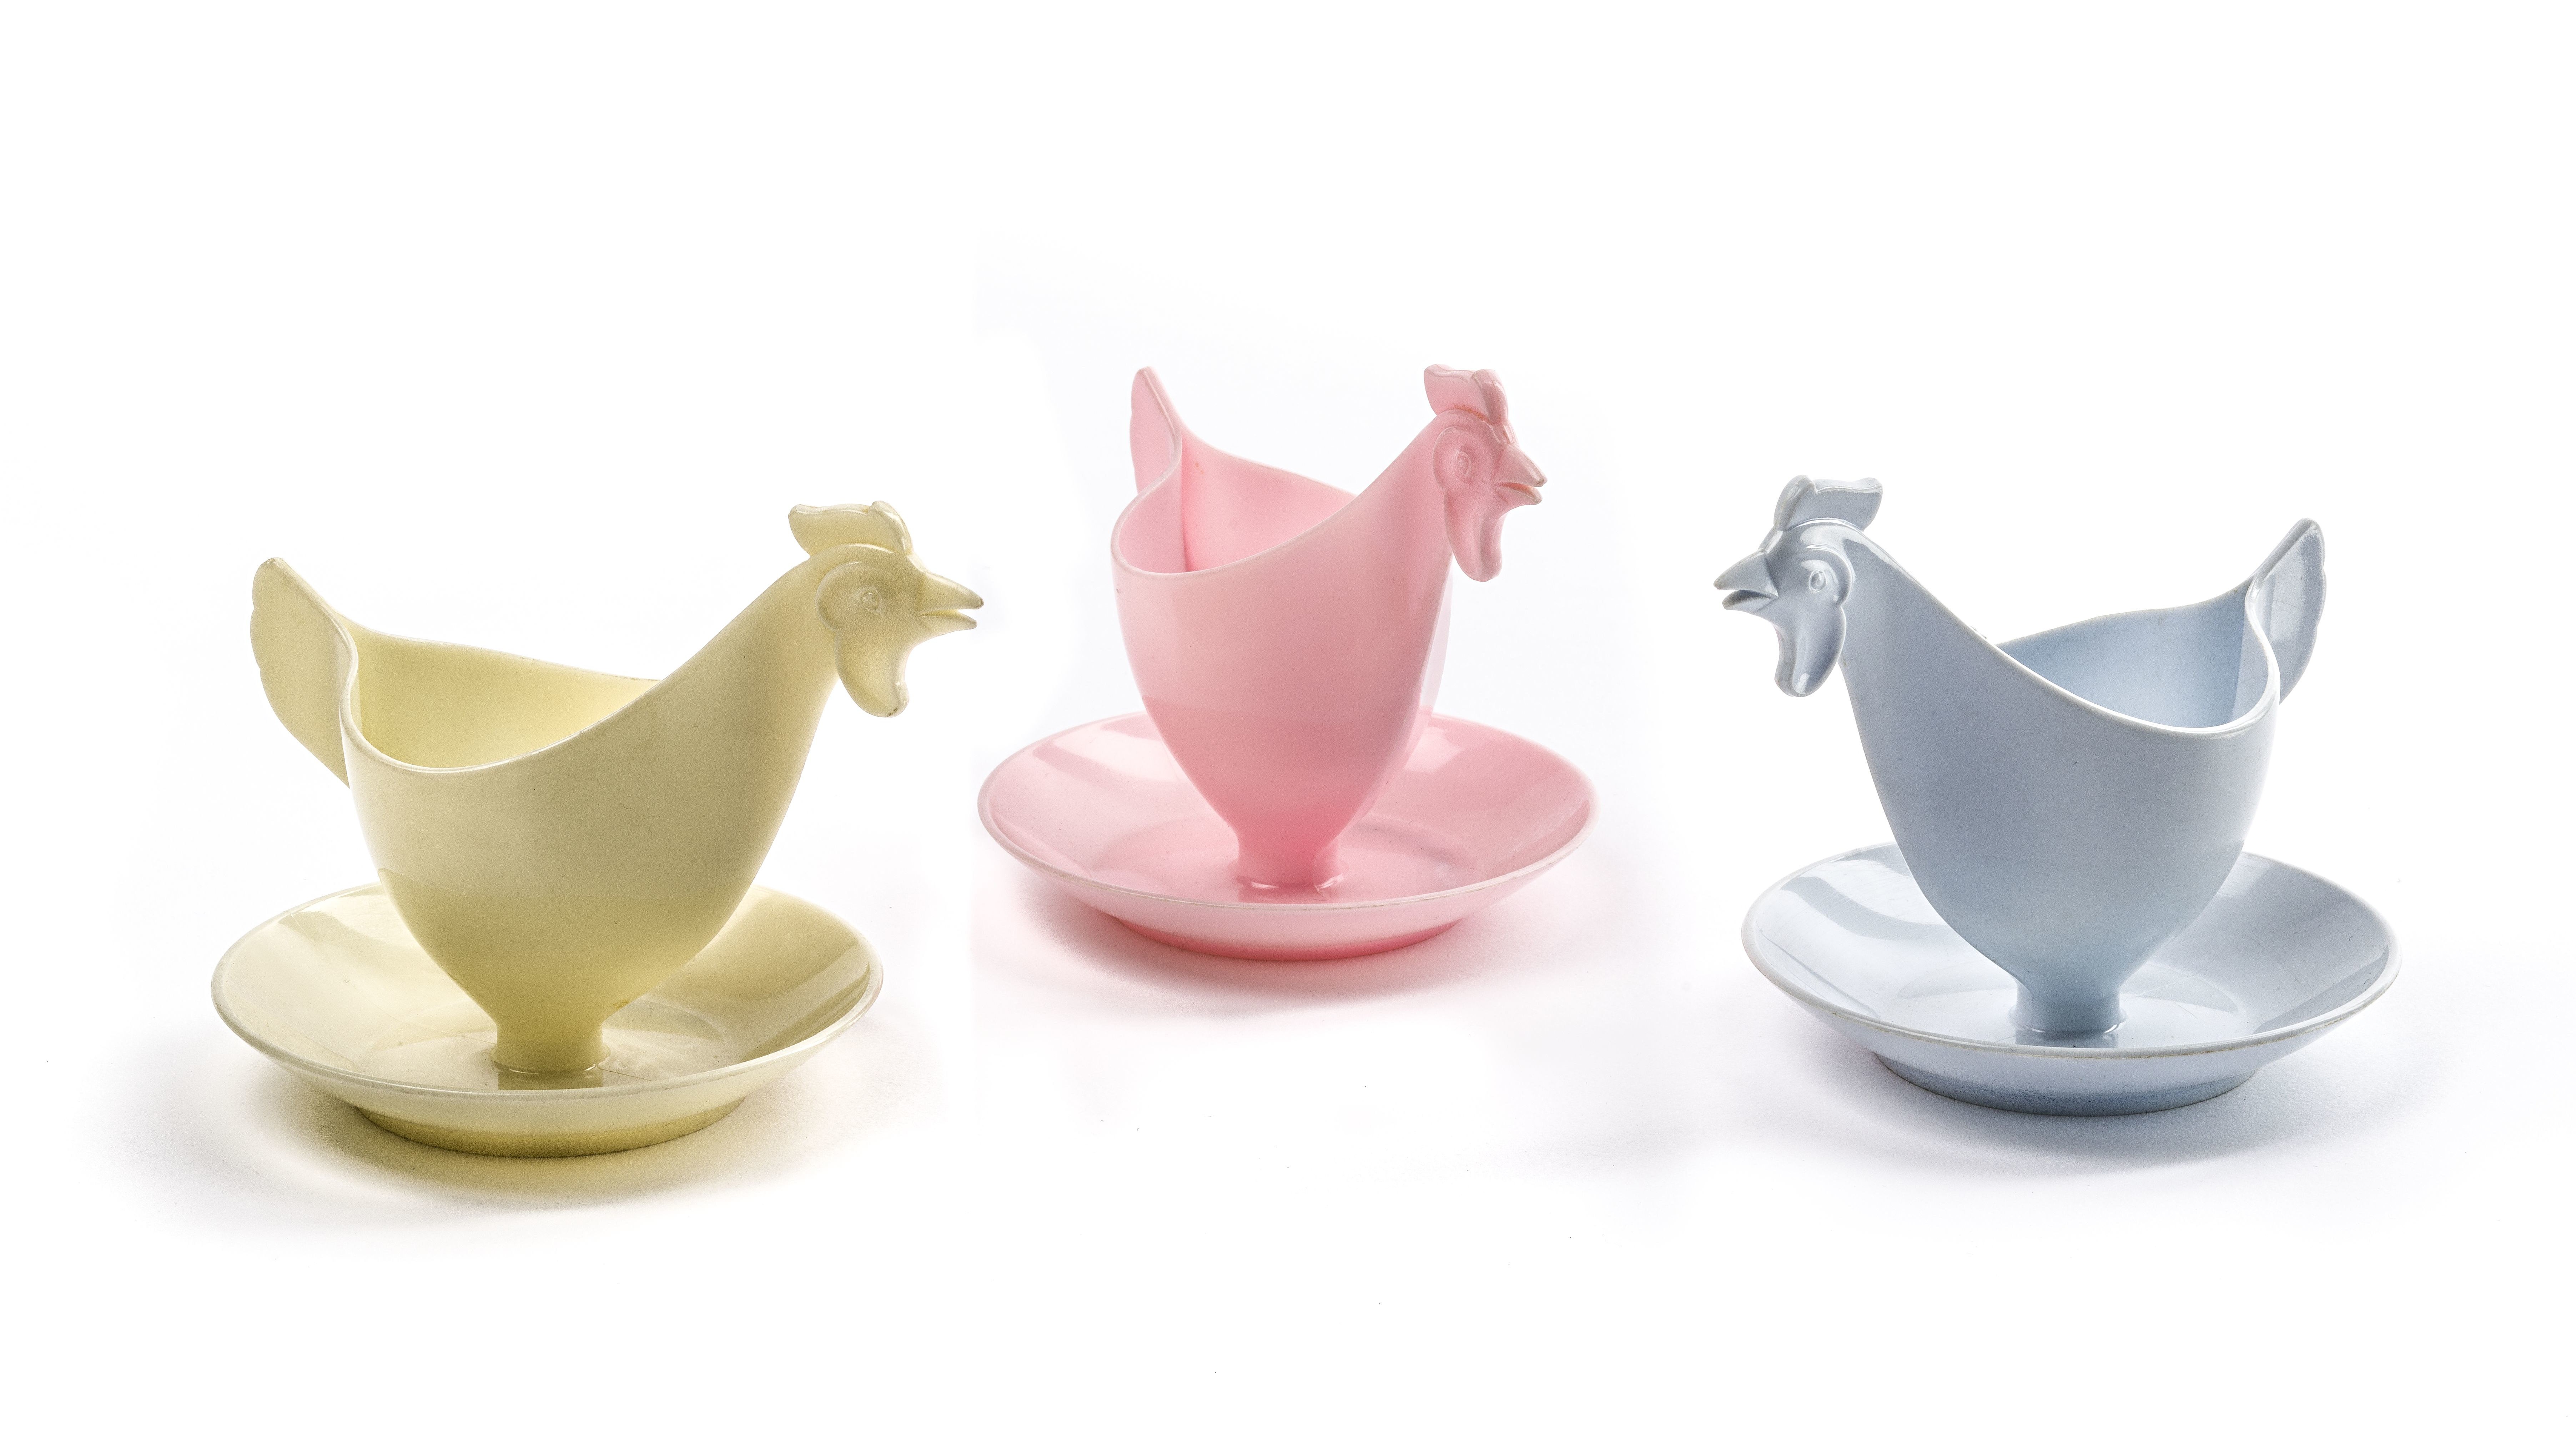 Pastel-coloured eggcups from GDR